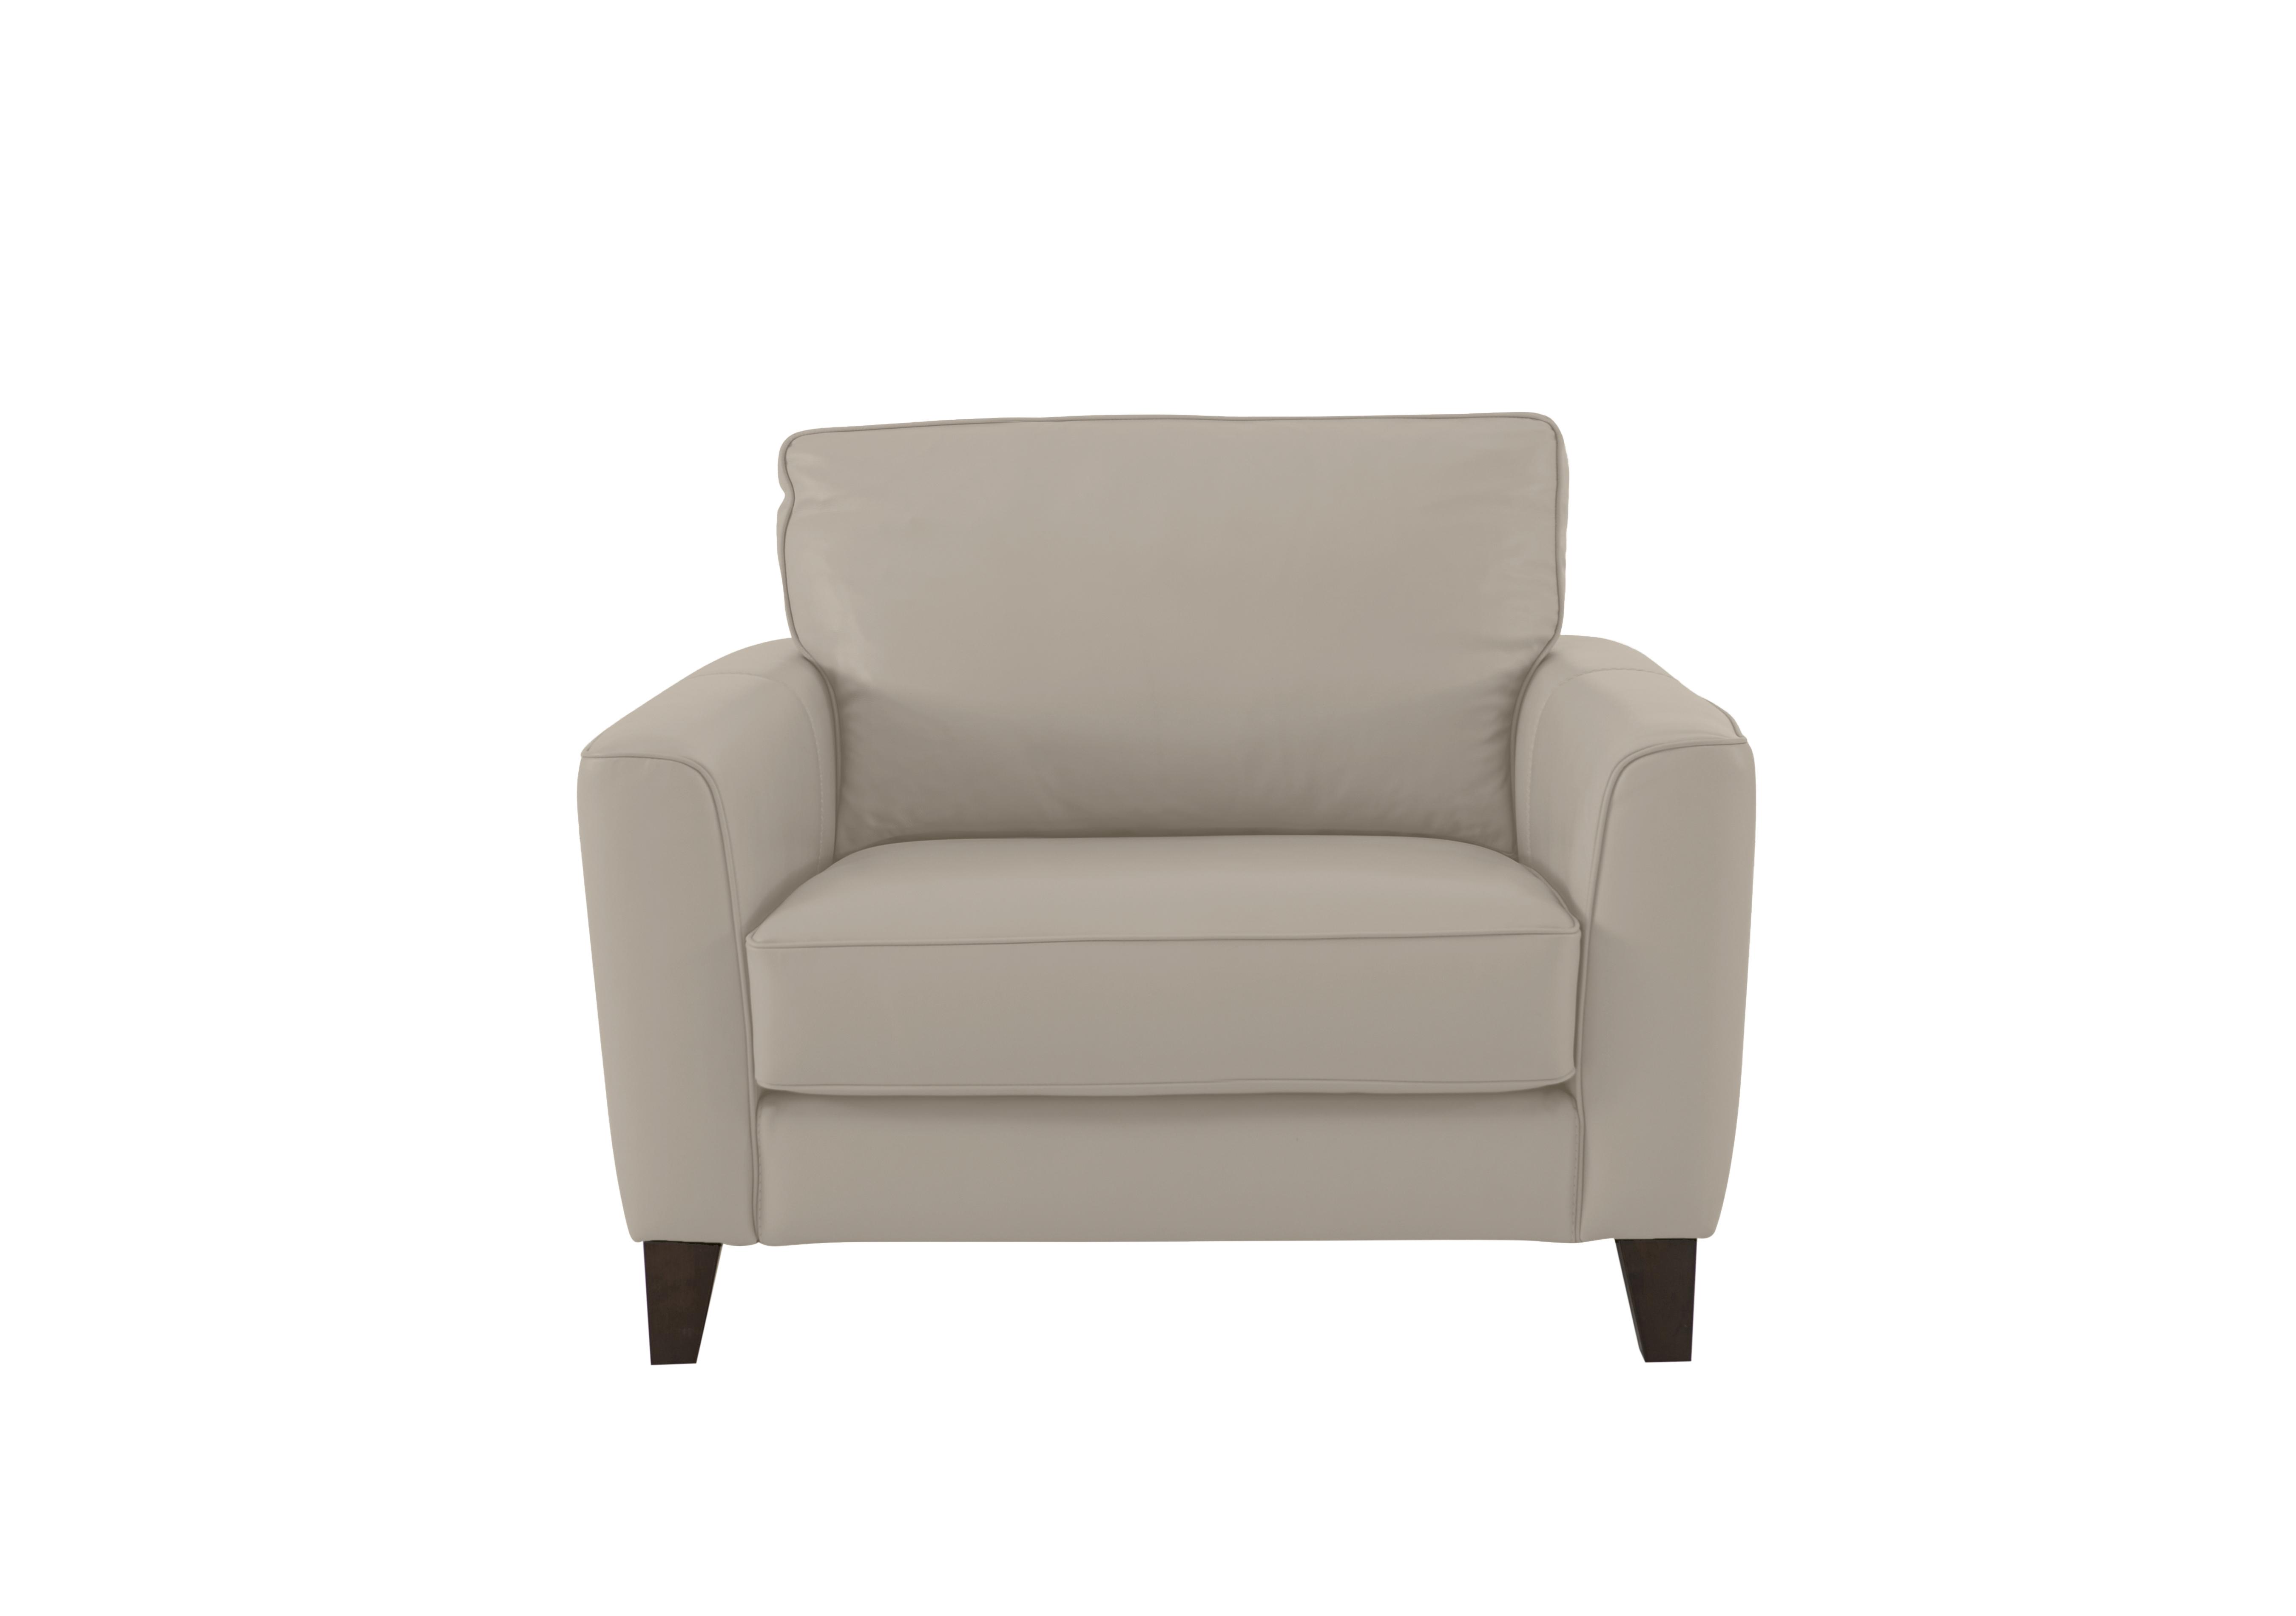 Brondby Leather Cuddle Chair in Bv-946b Silver Grey on Furniture Village